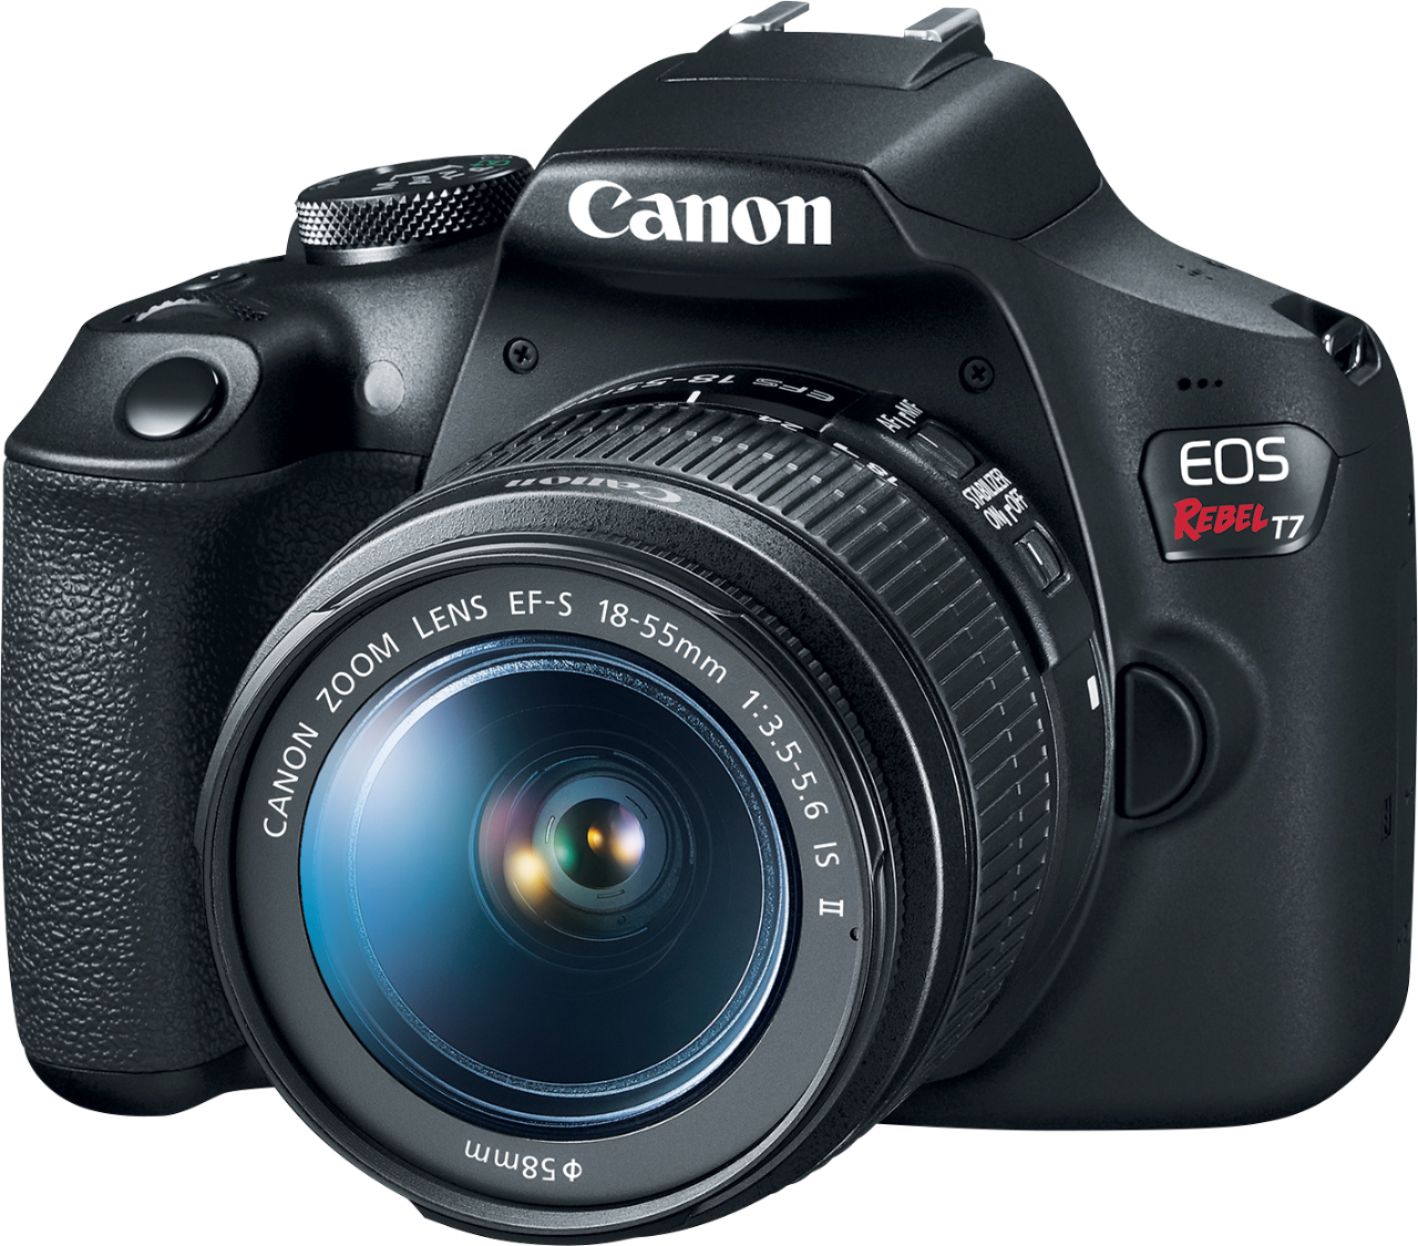 Canon EOS Rebel T7 DSLR Video Camera with 18-55mm Lens Black 